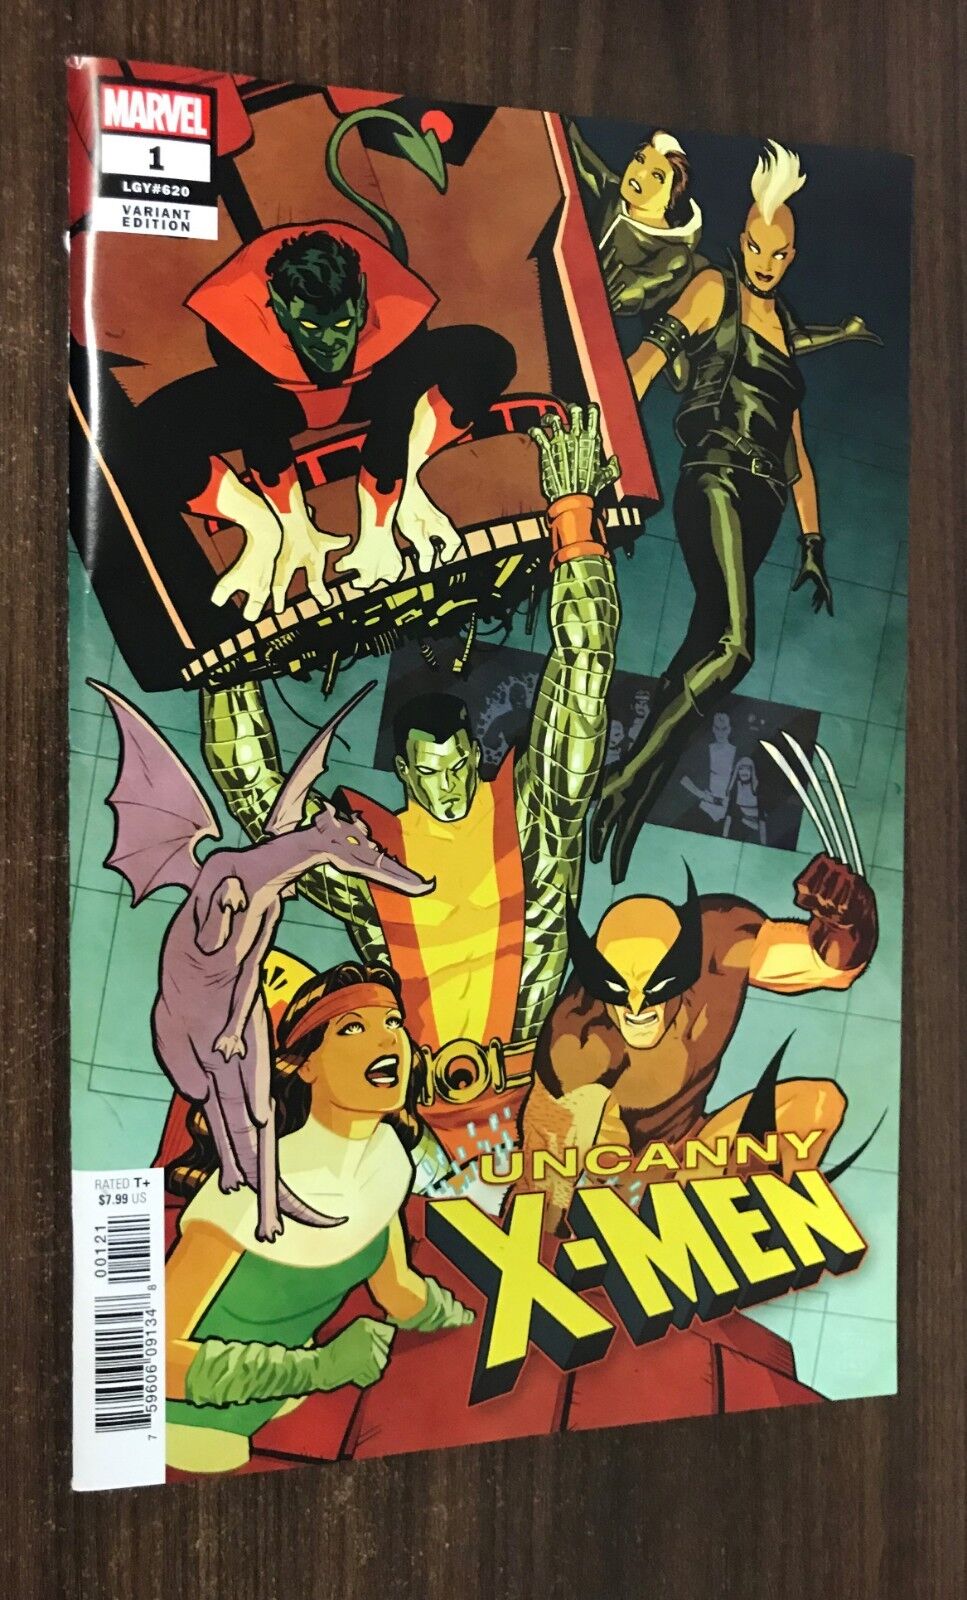 UNCANNY X-MEN #1 (Legacy #620) -- Limited 1:25 Cliff Chiang VARIANT -- VF/NM